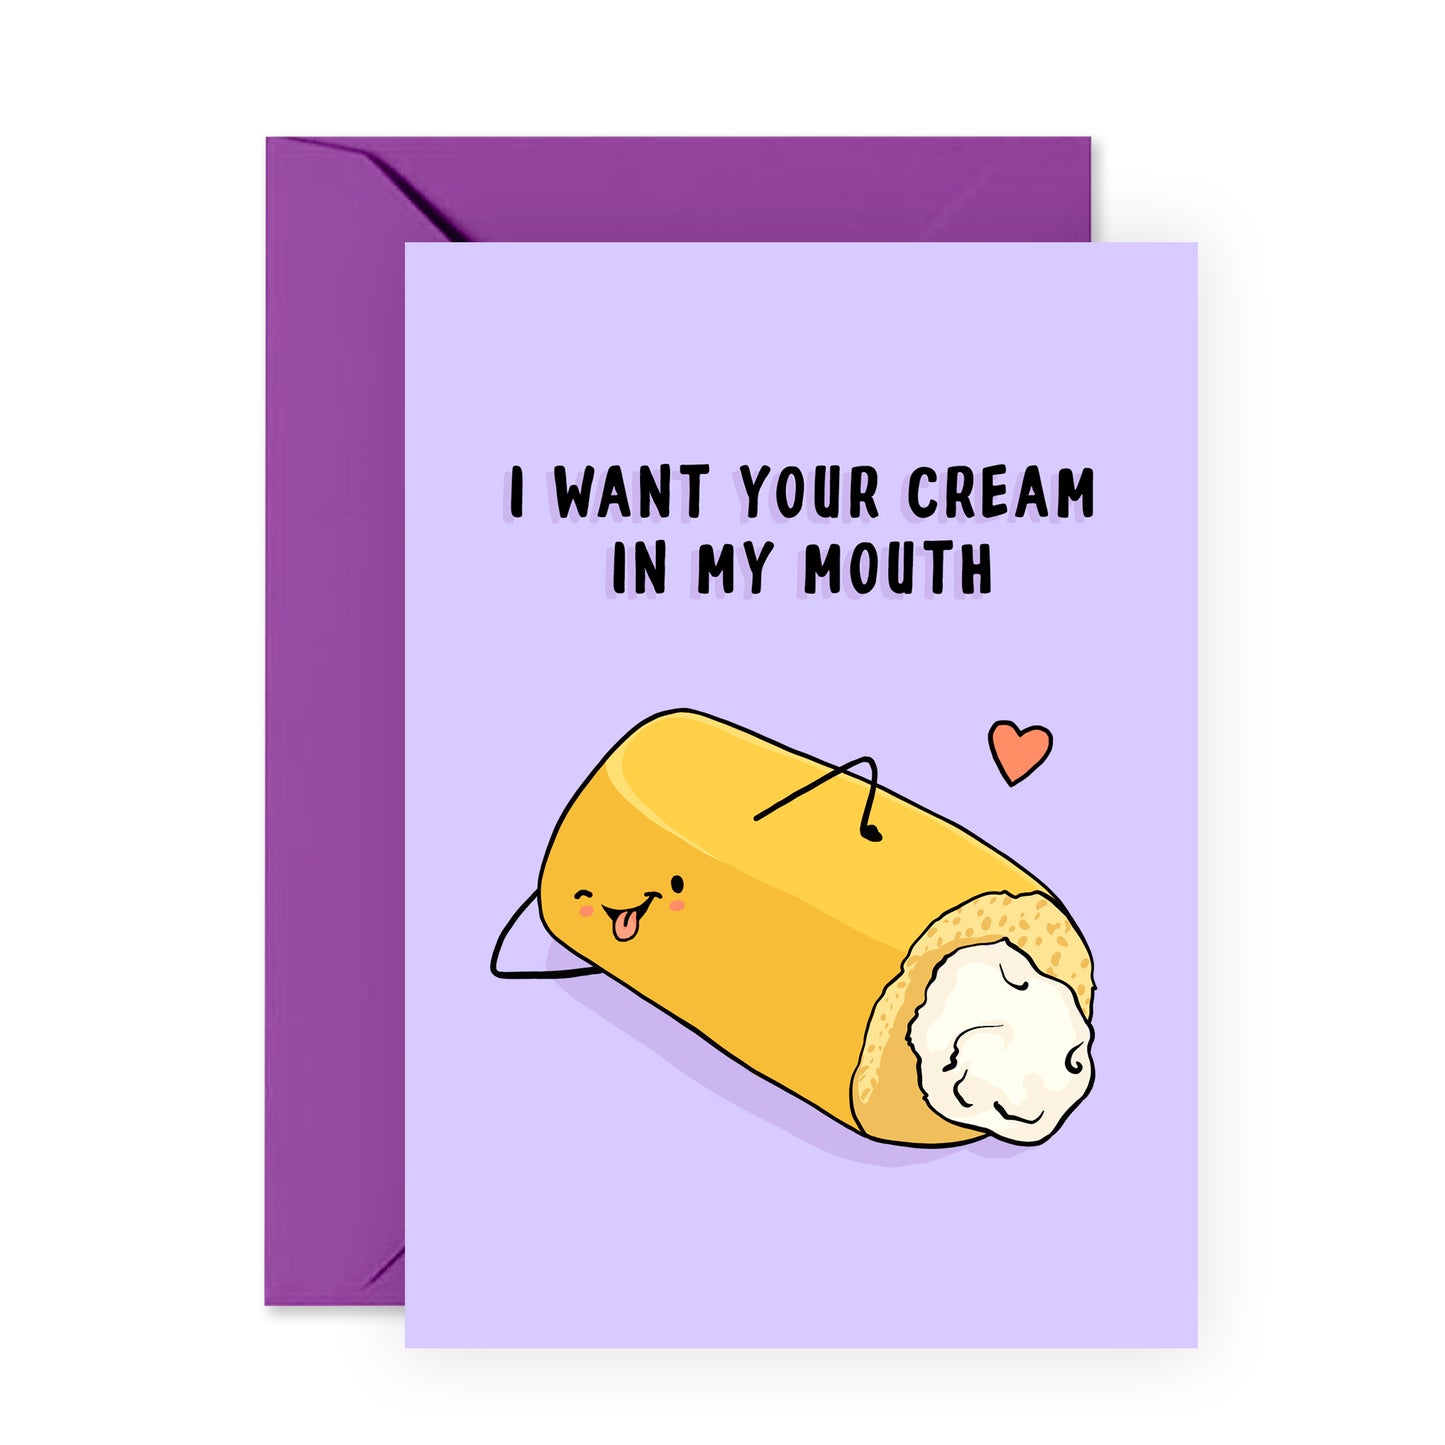 Naughty Anniversary Card - I Want Your Cream - For Men Him Husband